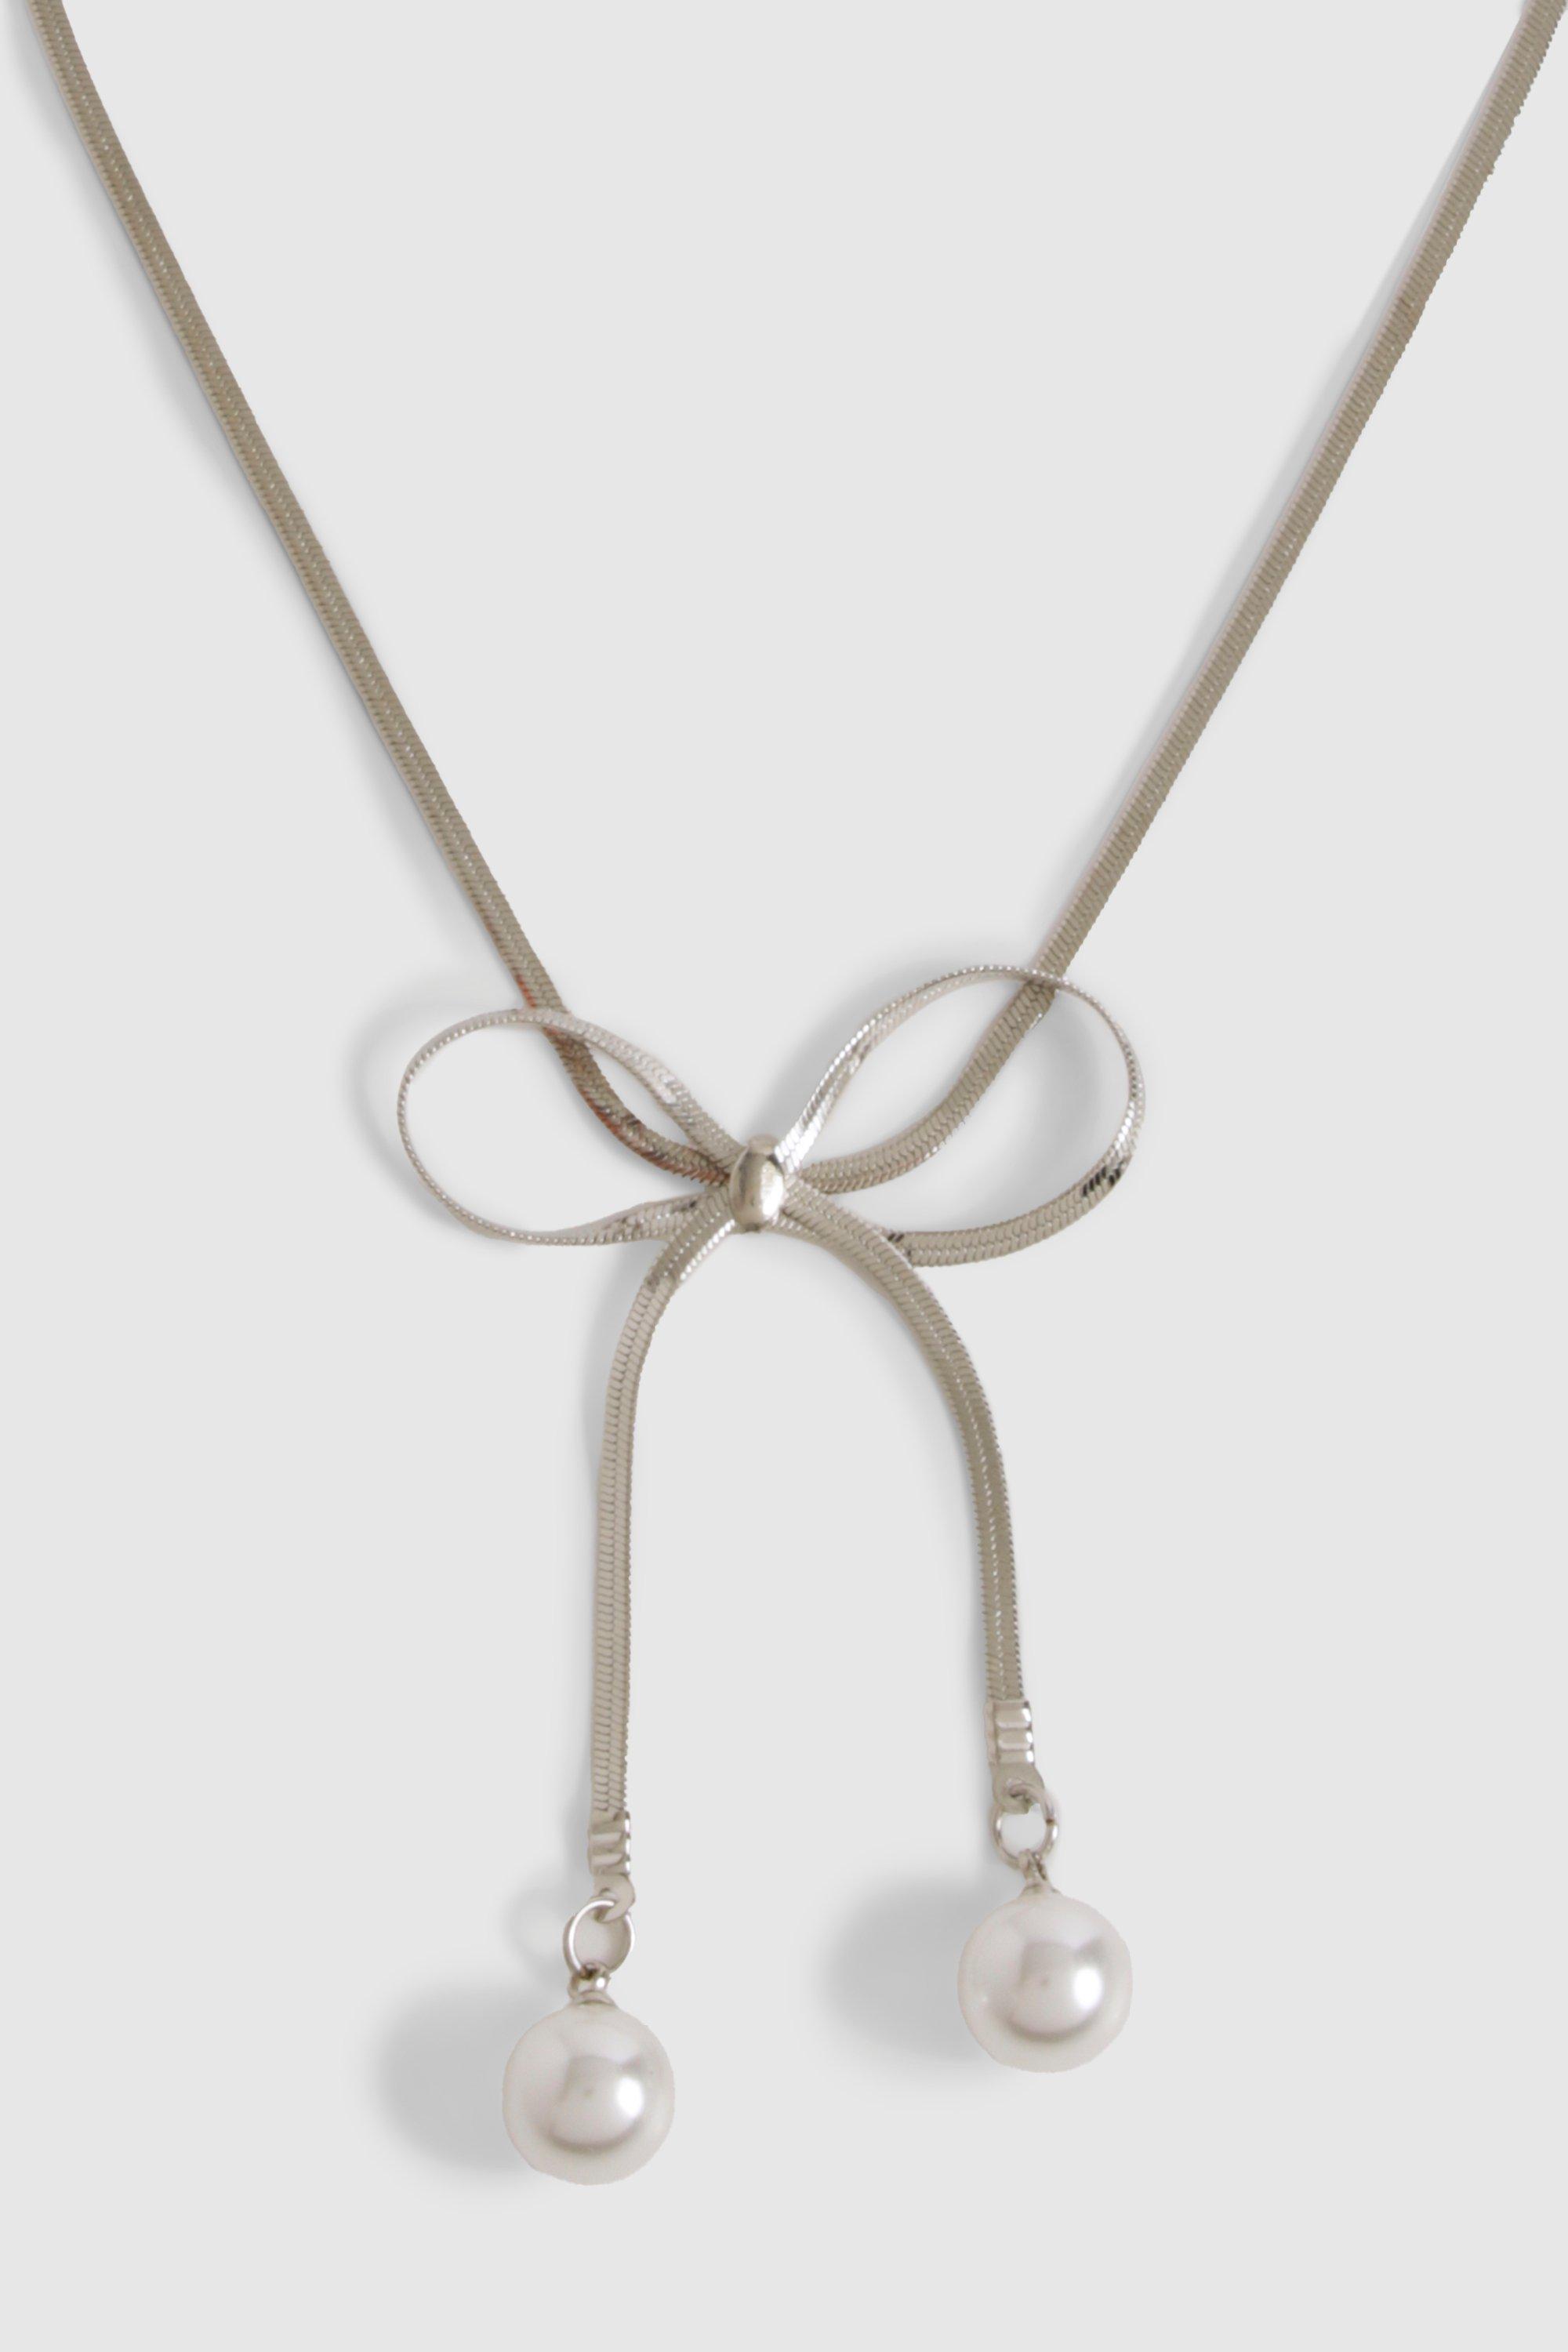 Image of Bow Pearl Detail Snakechain Necklace, Grigio